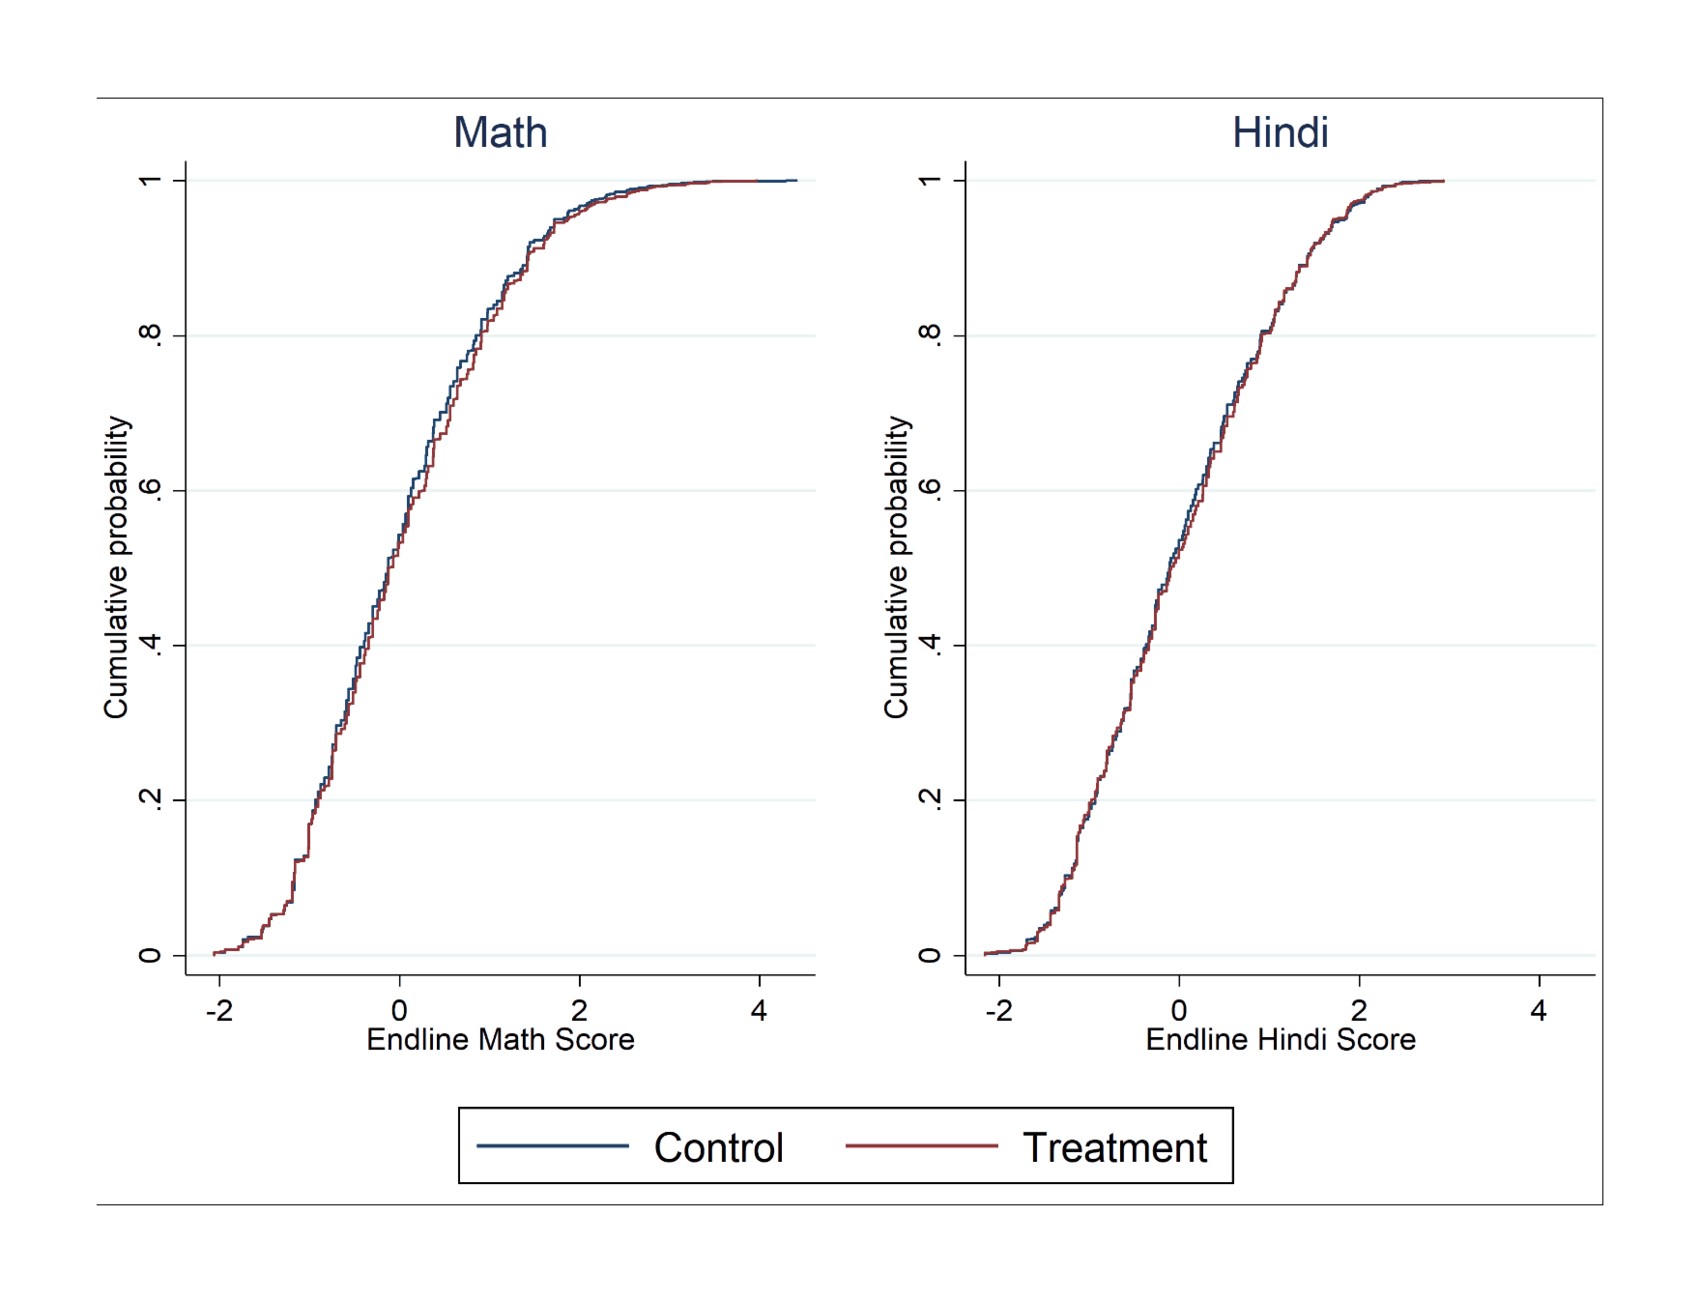 Figure 2: Distribution of student test scores at end (Feb 2016). Notes: This figure shows the distribution of individual student test scores for grades 1–8 in mathematics and Hindi from independent test data collection in February 2016. Test scores are standardized within grade with a control group mean of zero and standard deviation 1.